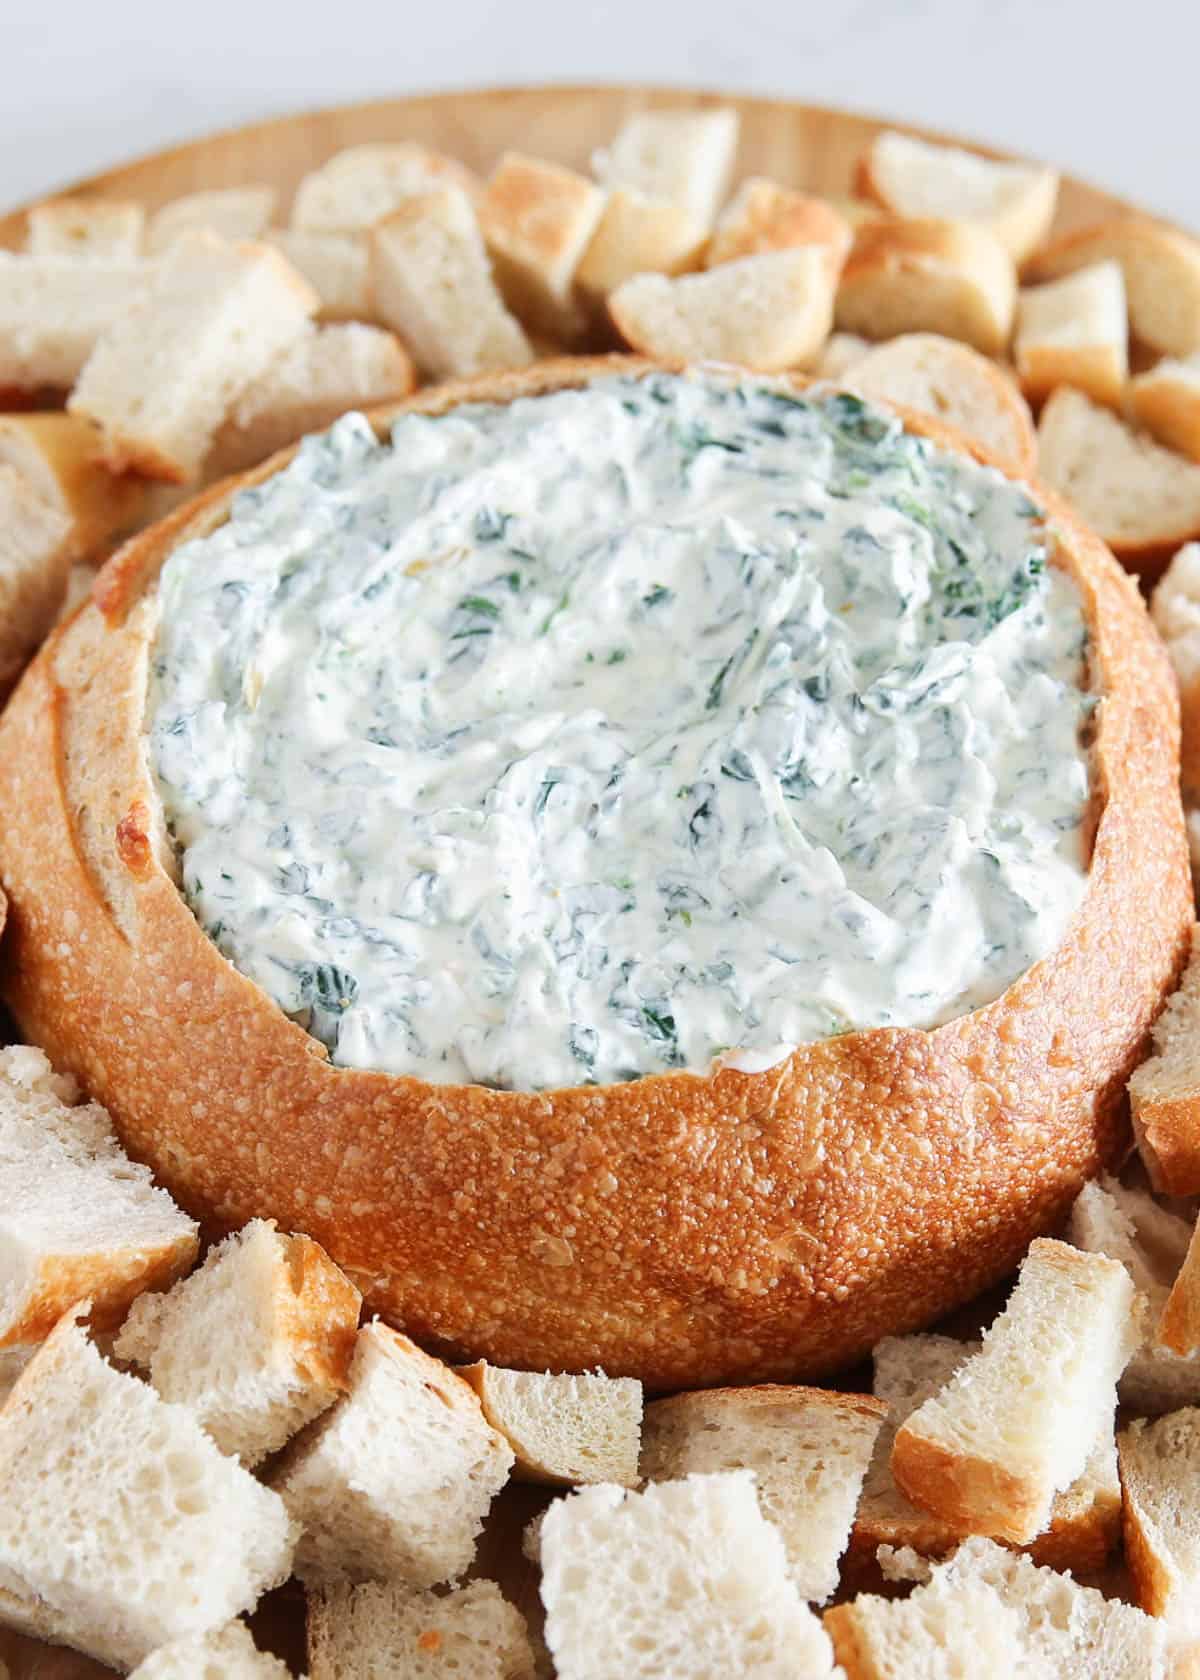 Knorr spinach dip in a bread bowl.